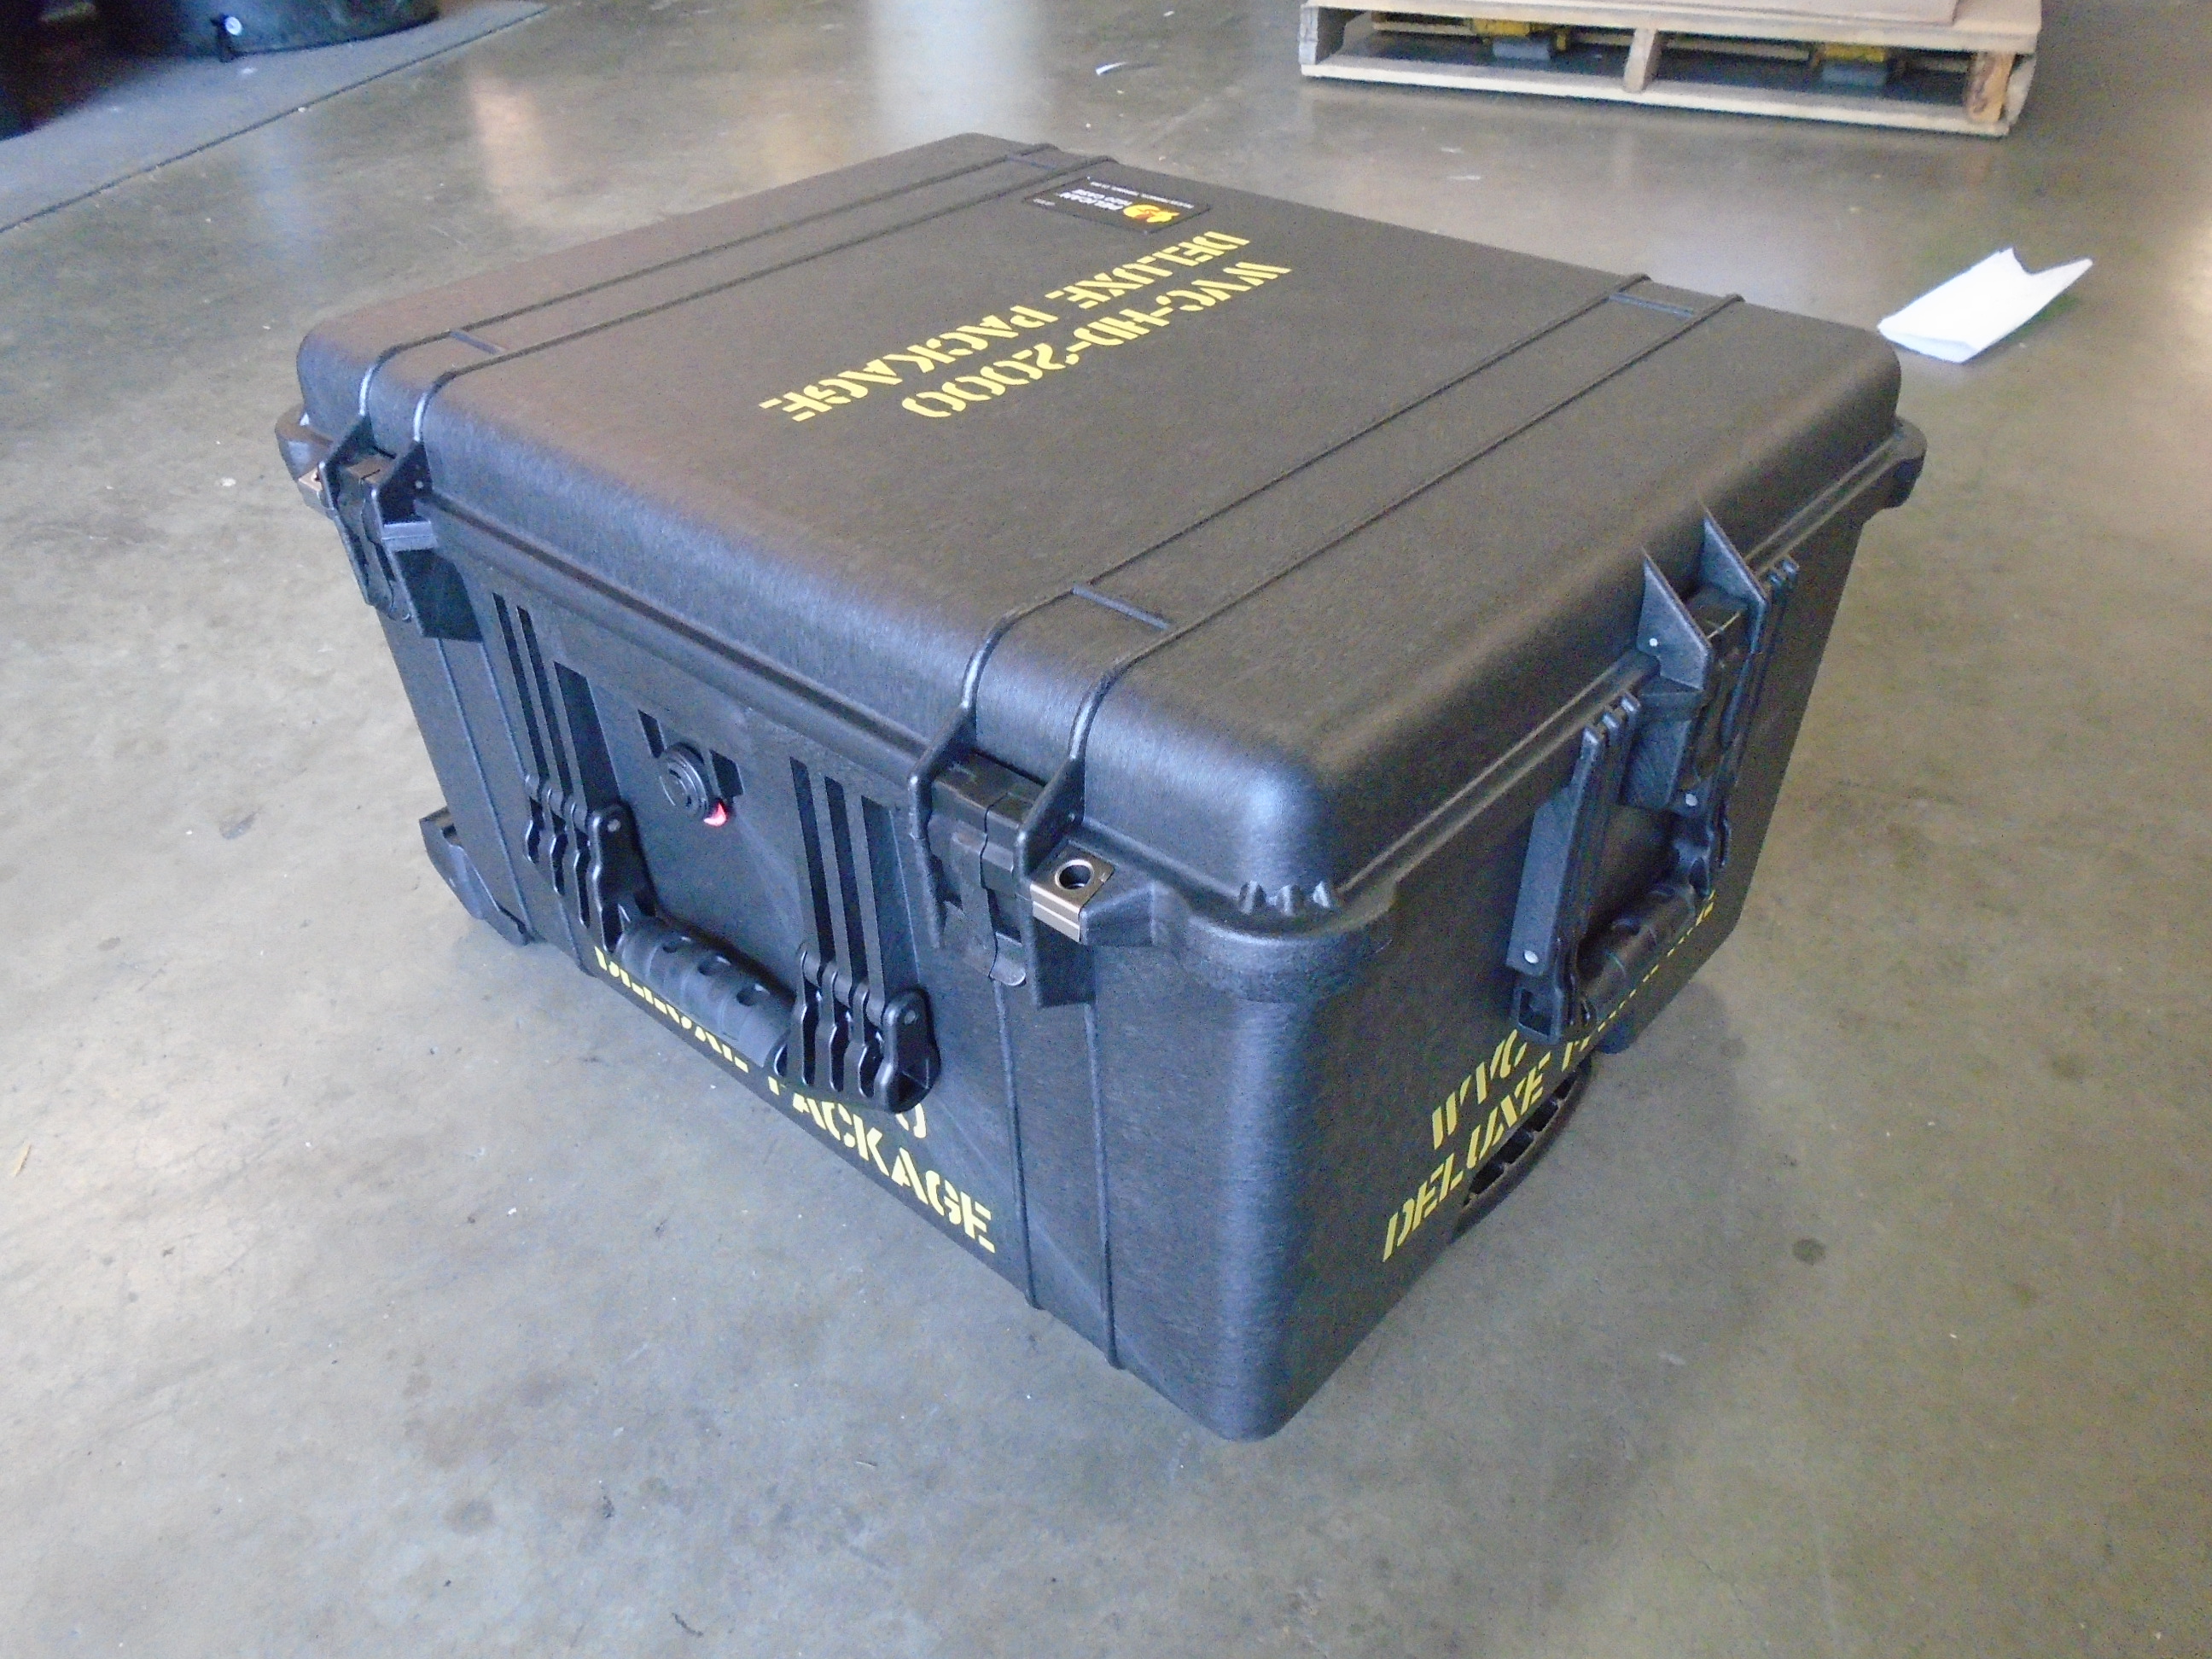 Print # 6766 - Retrofit Existing Pelican 1620 Case for WVC HD 2000k HDSDI HDMI 1080P 3d Wireless Video Delux Package By Nelson Case Corp